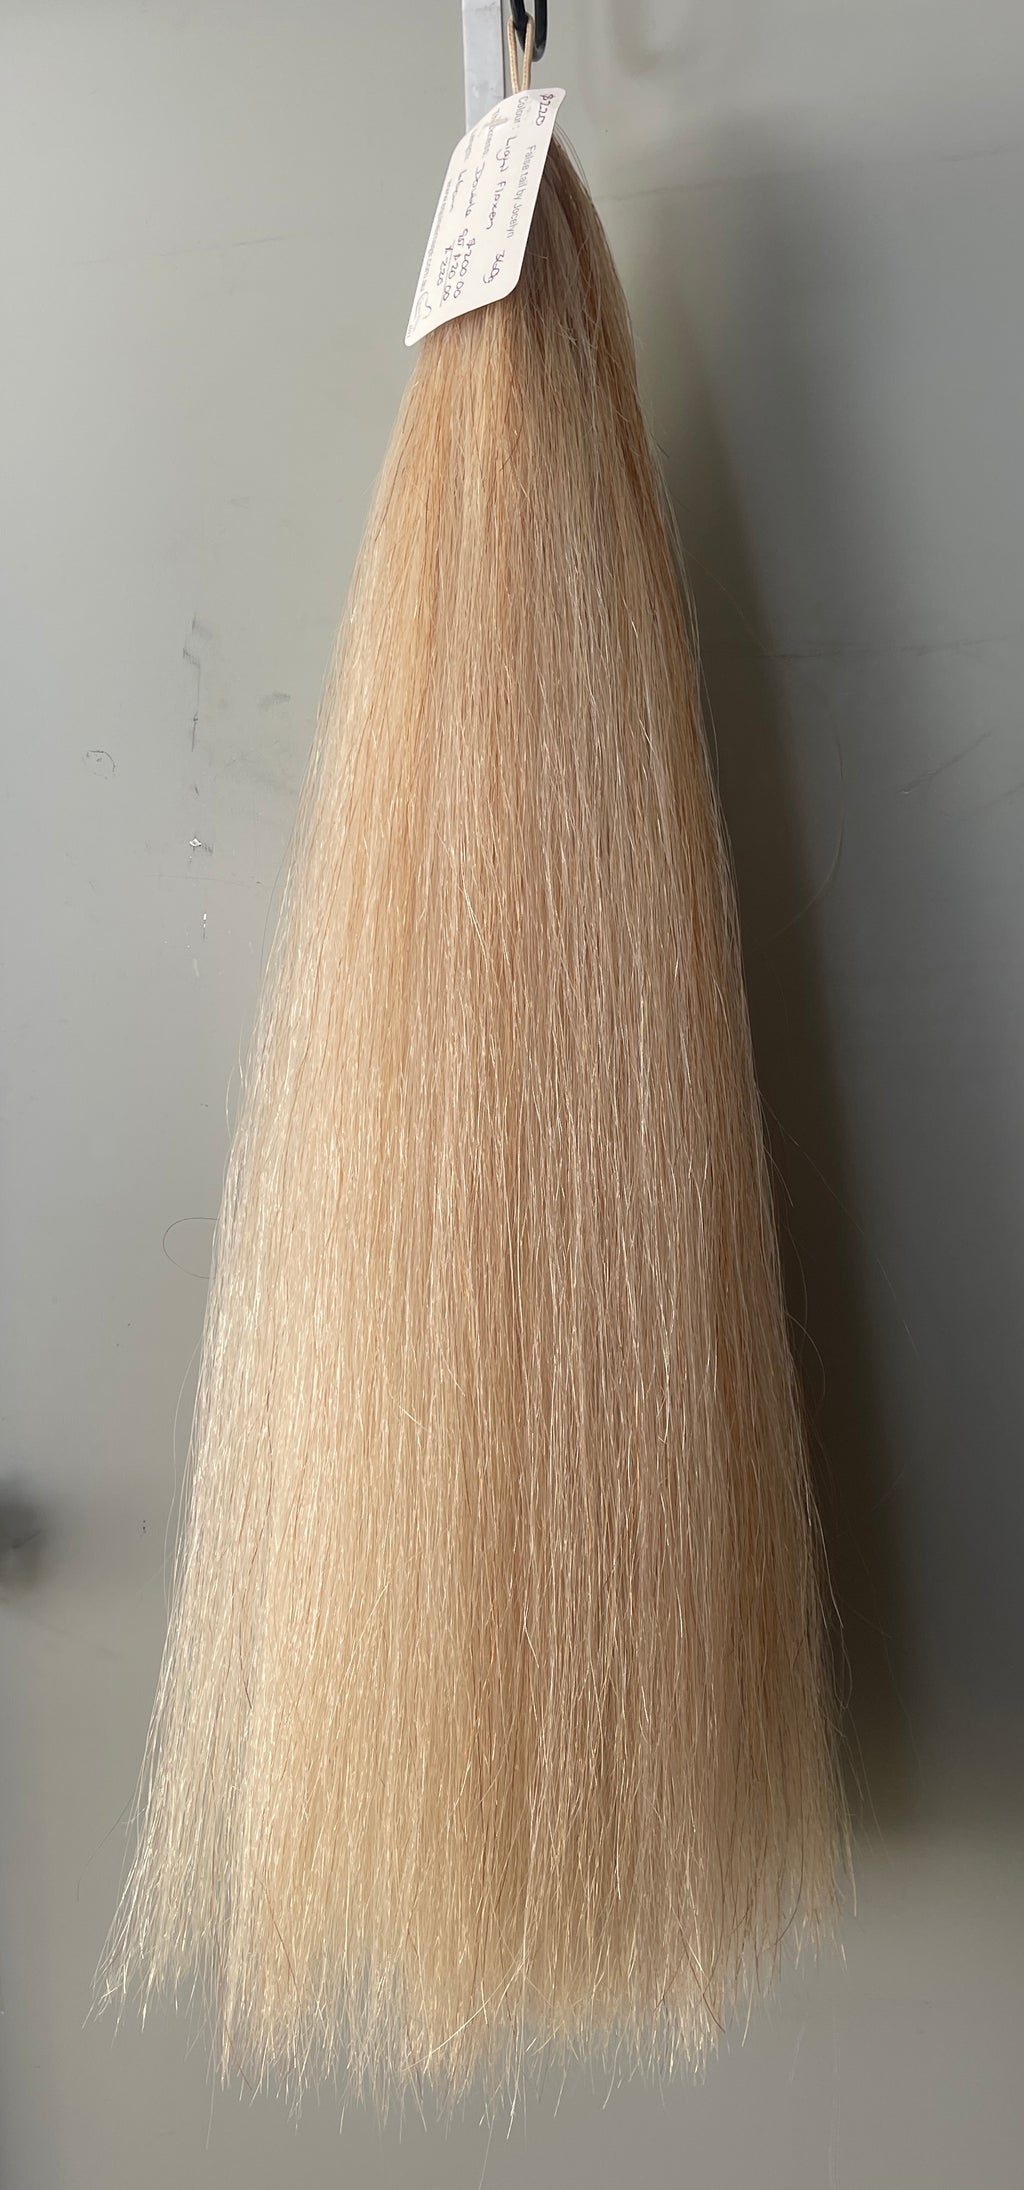 Light white flaxen Double thickness 66 cm long cut end